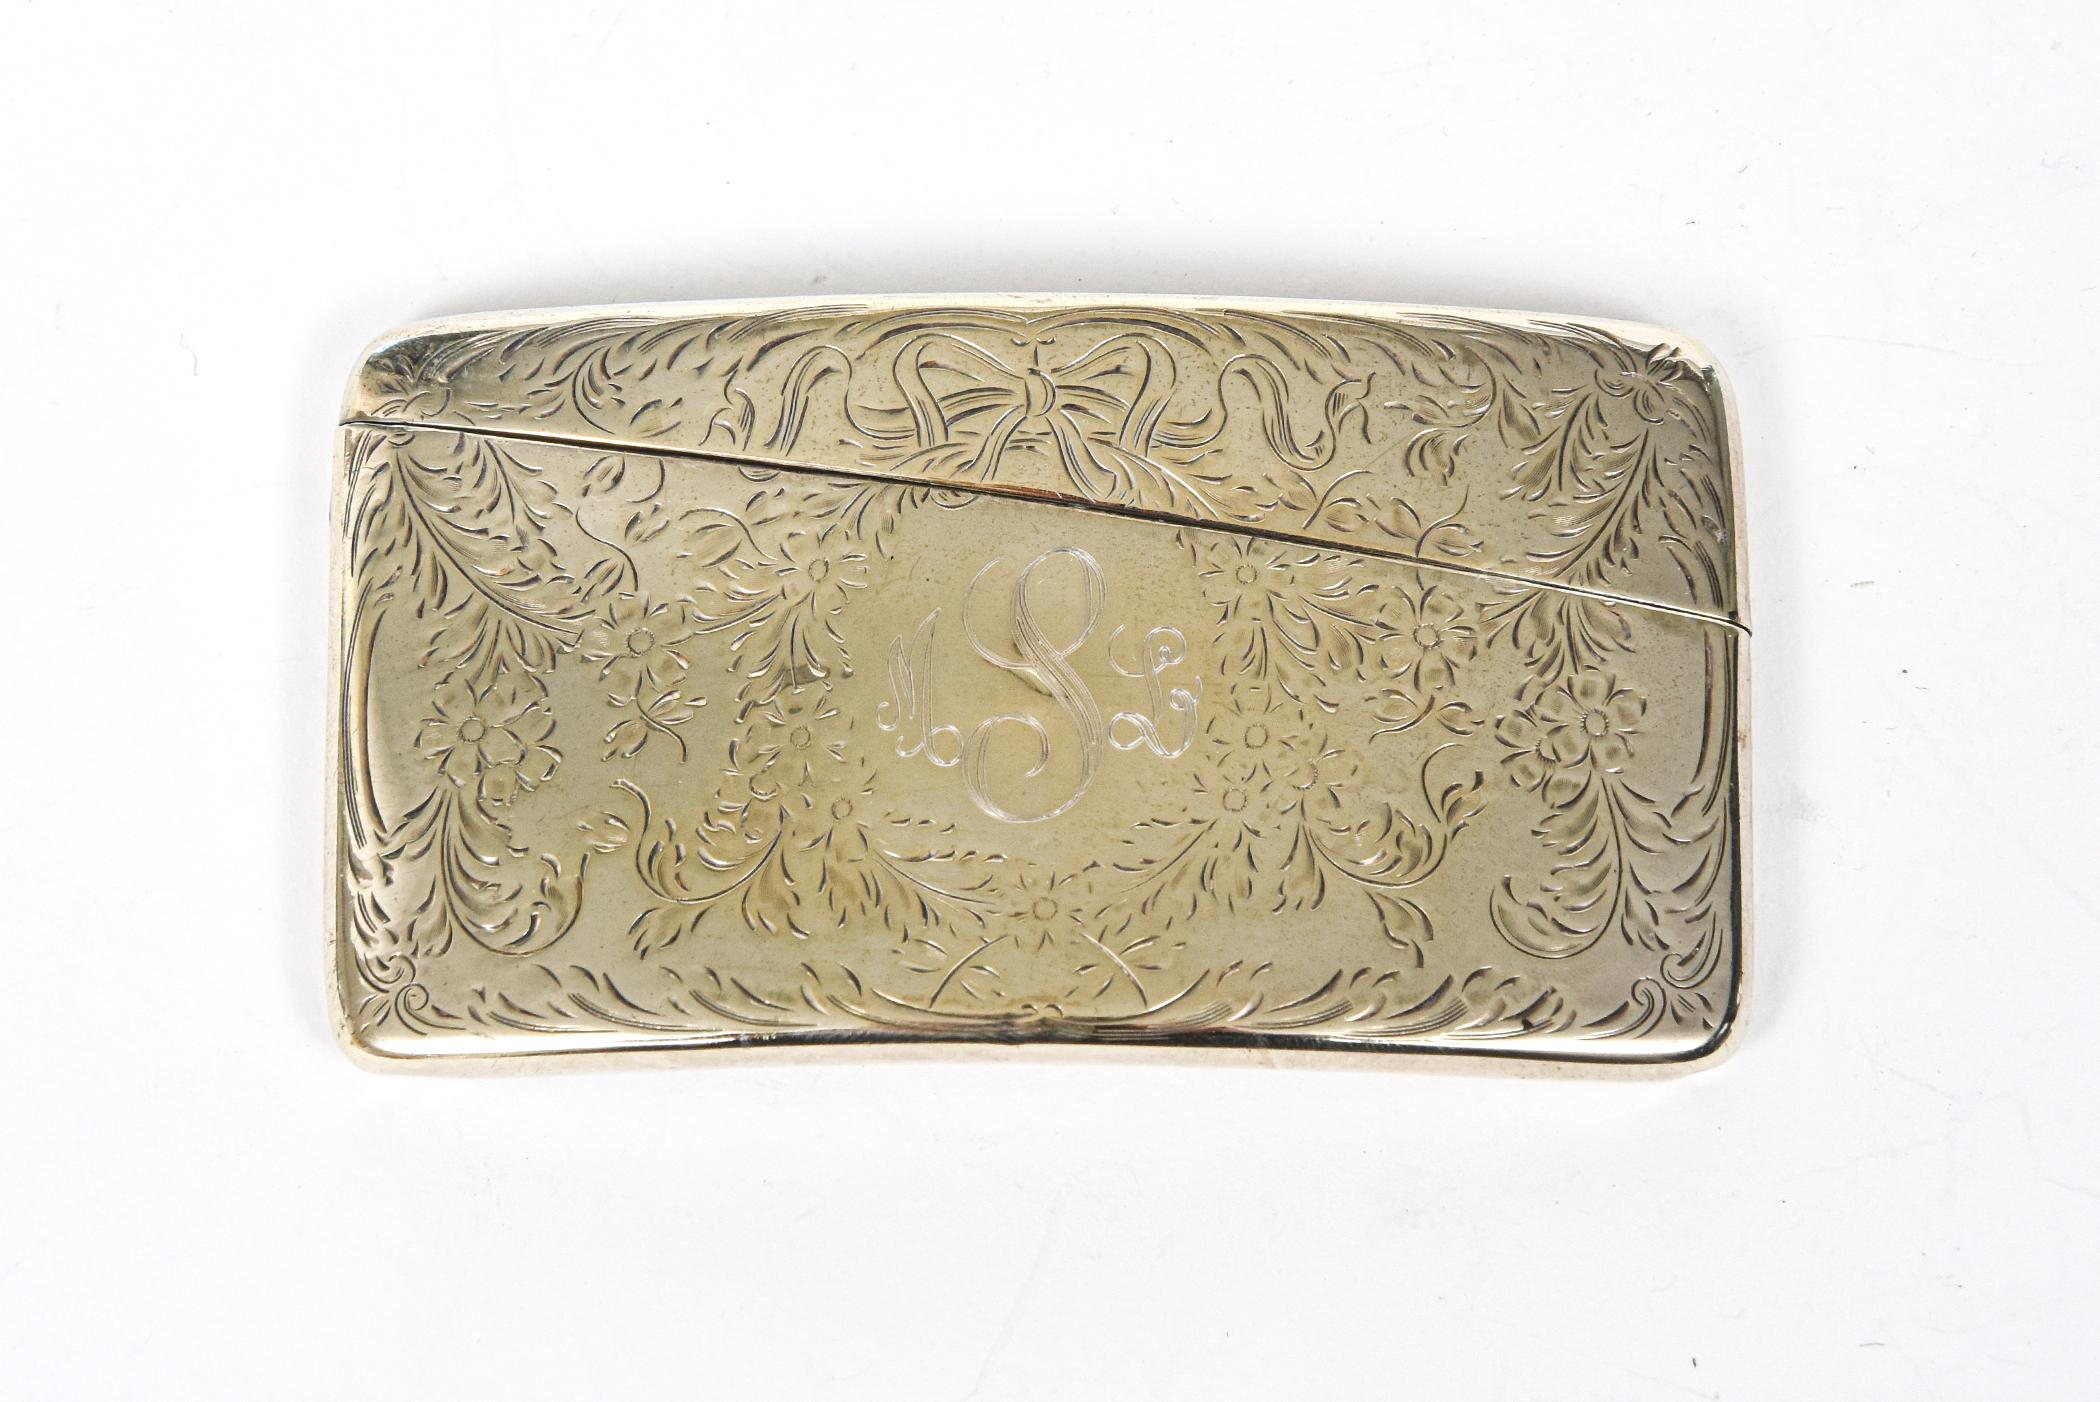 Finely made Victorian sterling silver calling card case featuring an engraved floral design with a bow centrally set on the top of the area with a monogram. The monogram looks like MSL to me. It is curved design. One side is engraved and the other